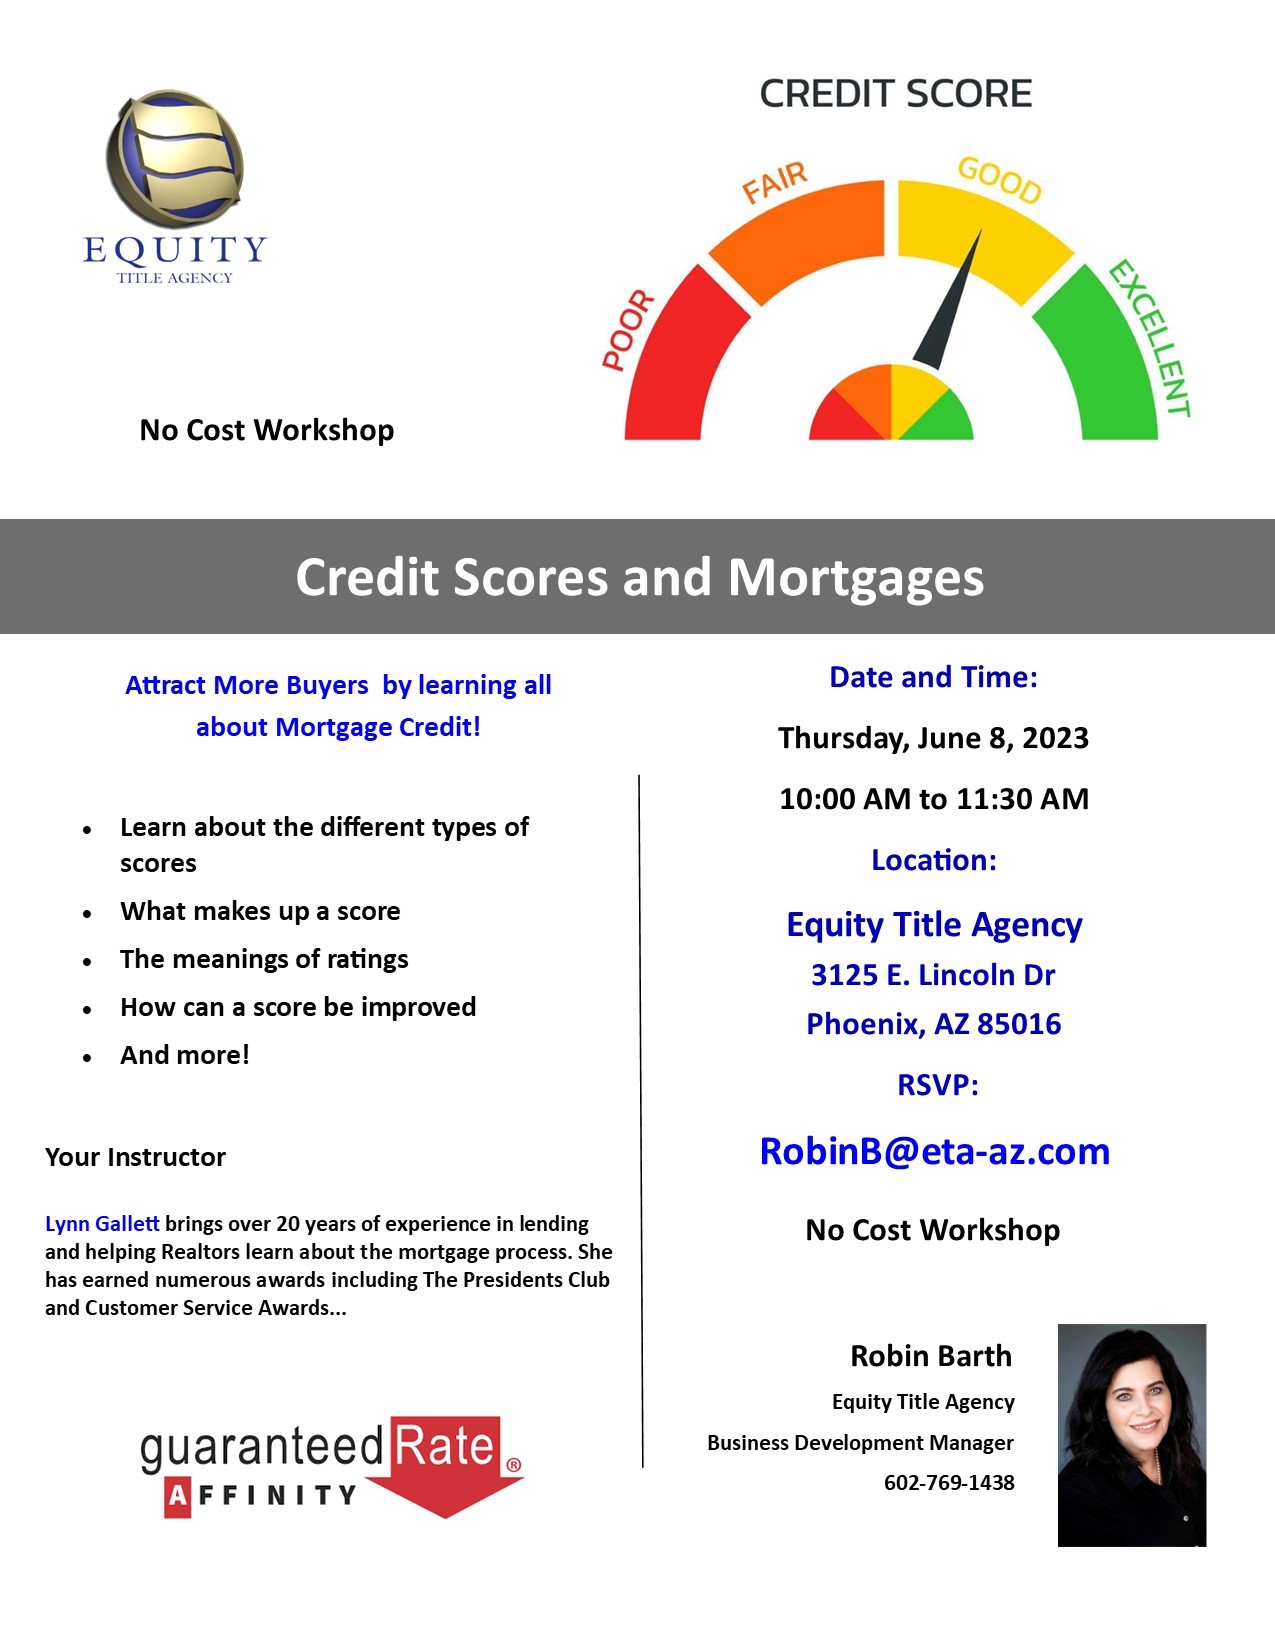 Credit Scores and Mortgages